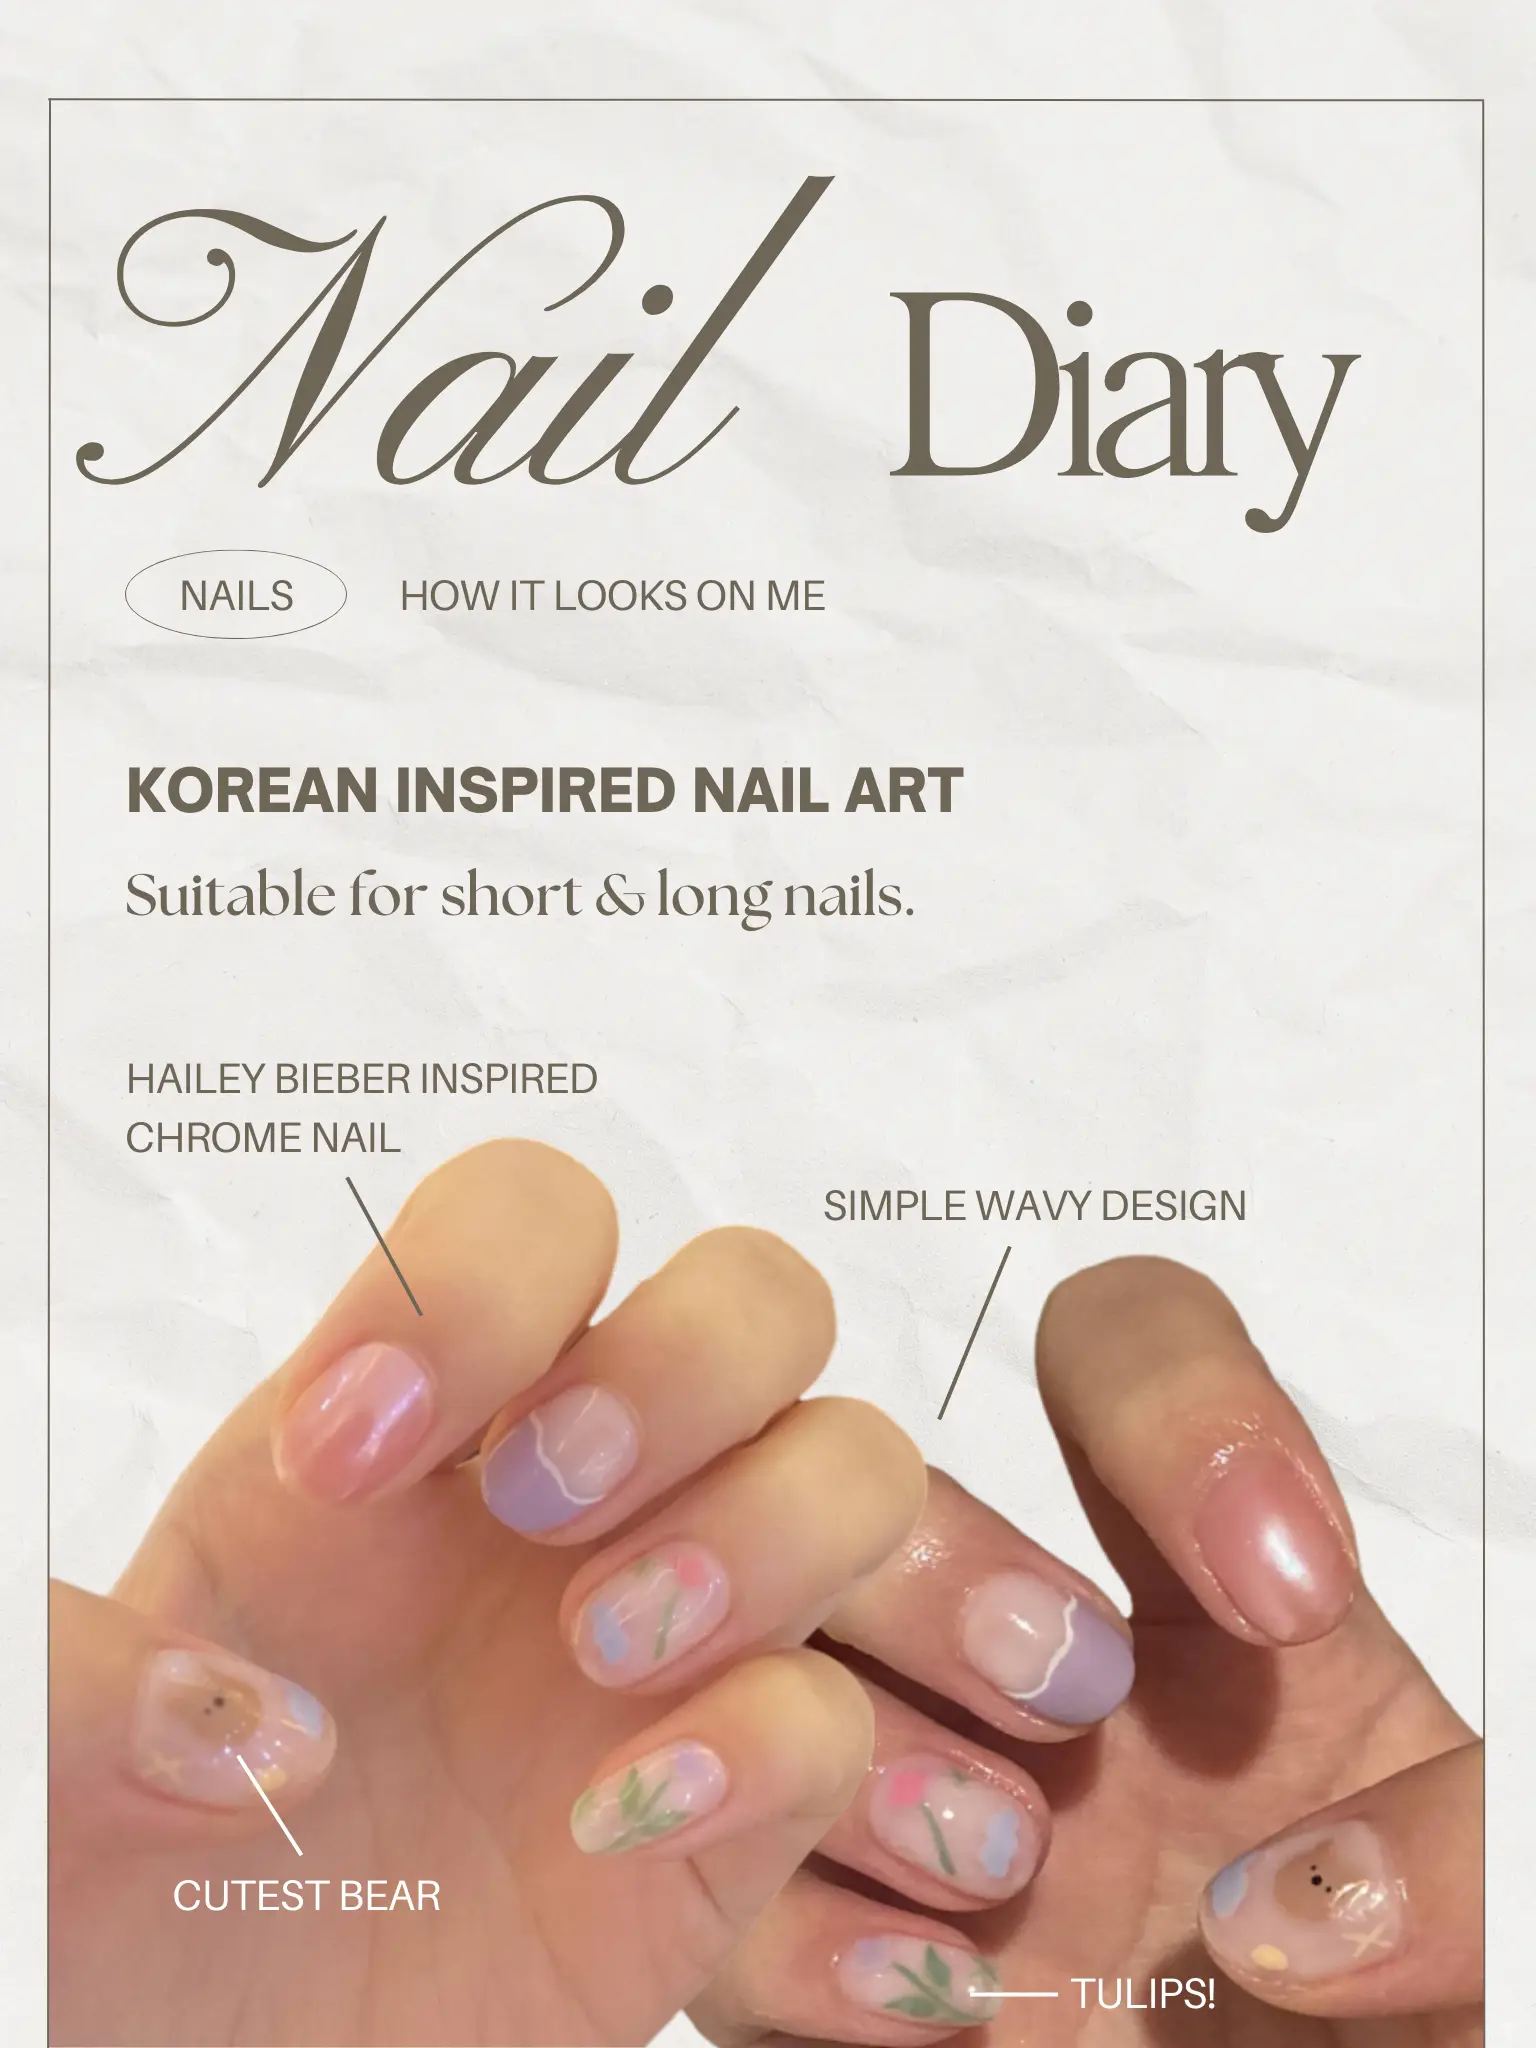 SUMMER nails perfect for sunny SG 🍳☀️, Gallery posted by keni ◡̈⃝ ✿